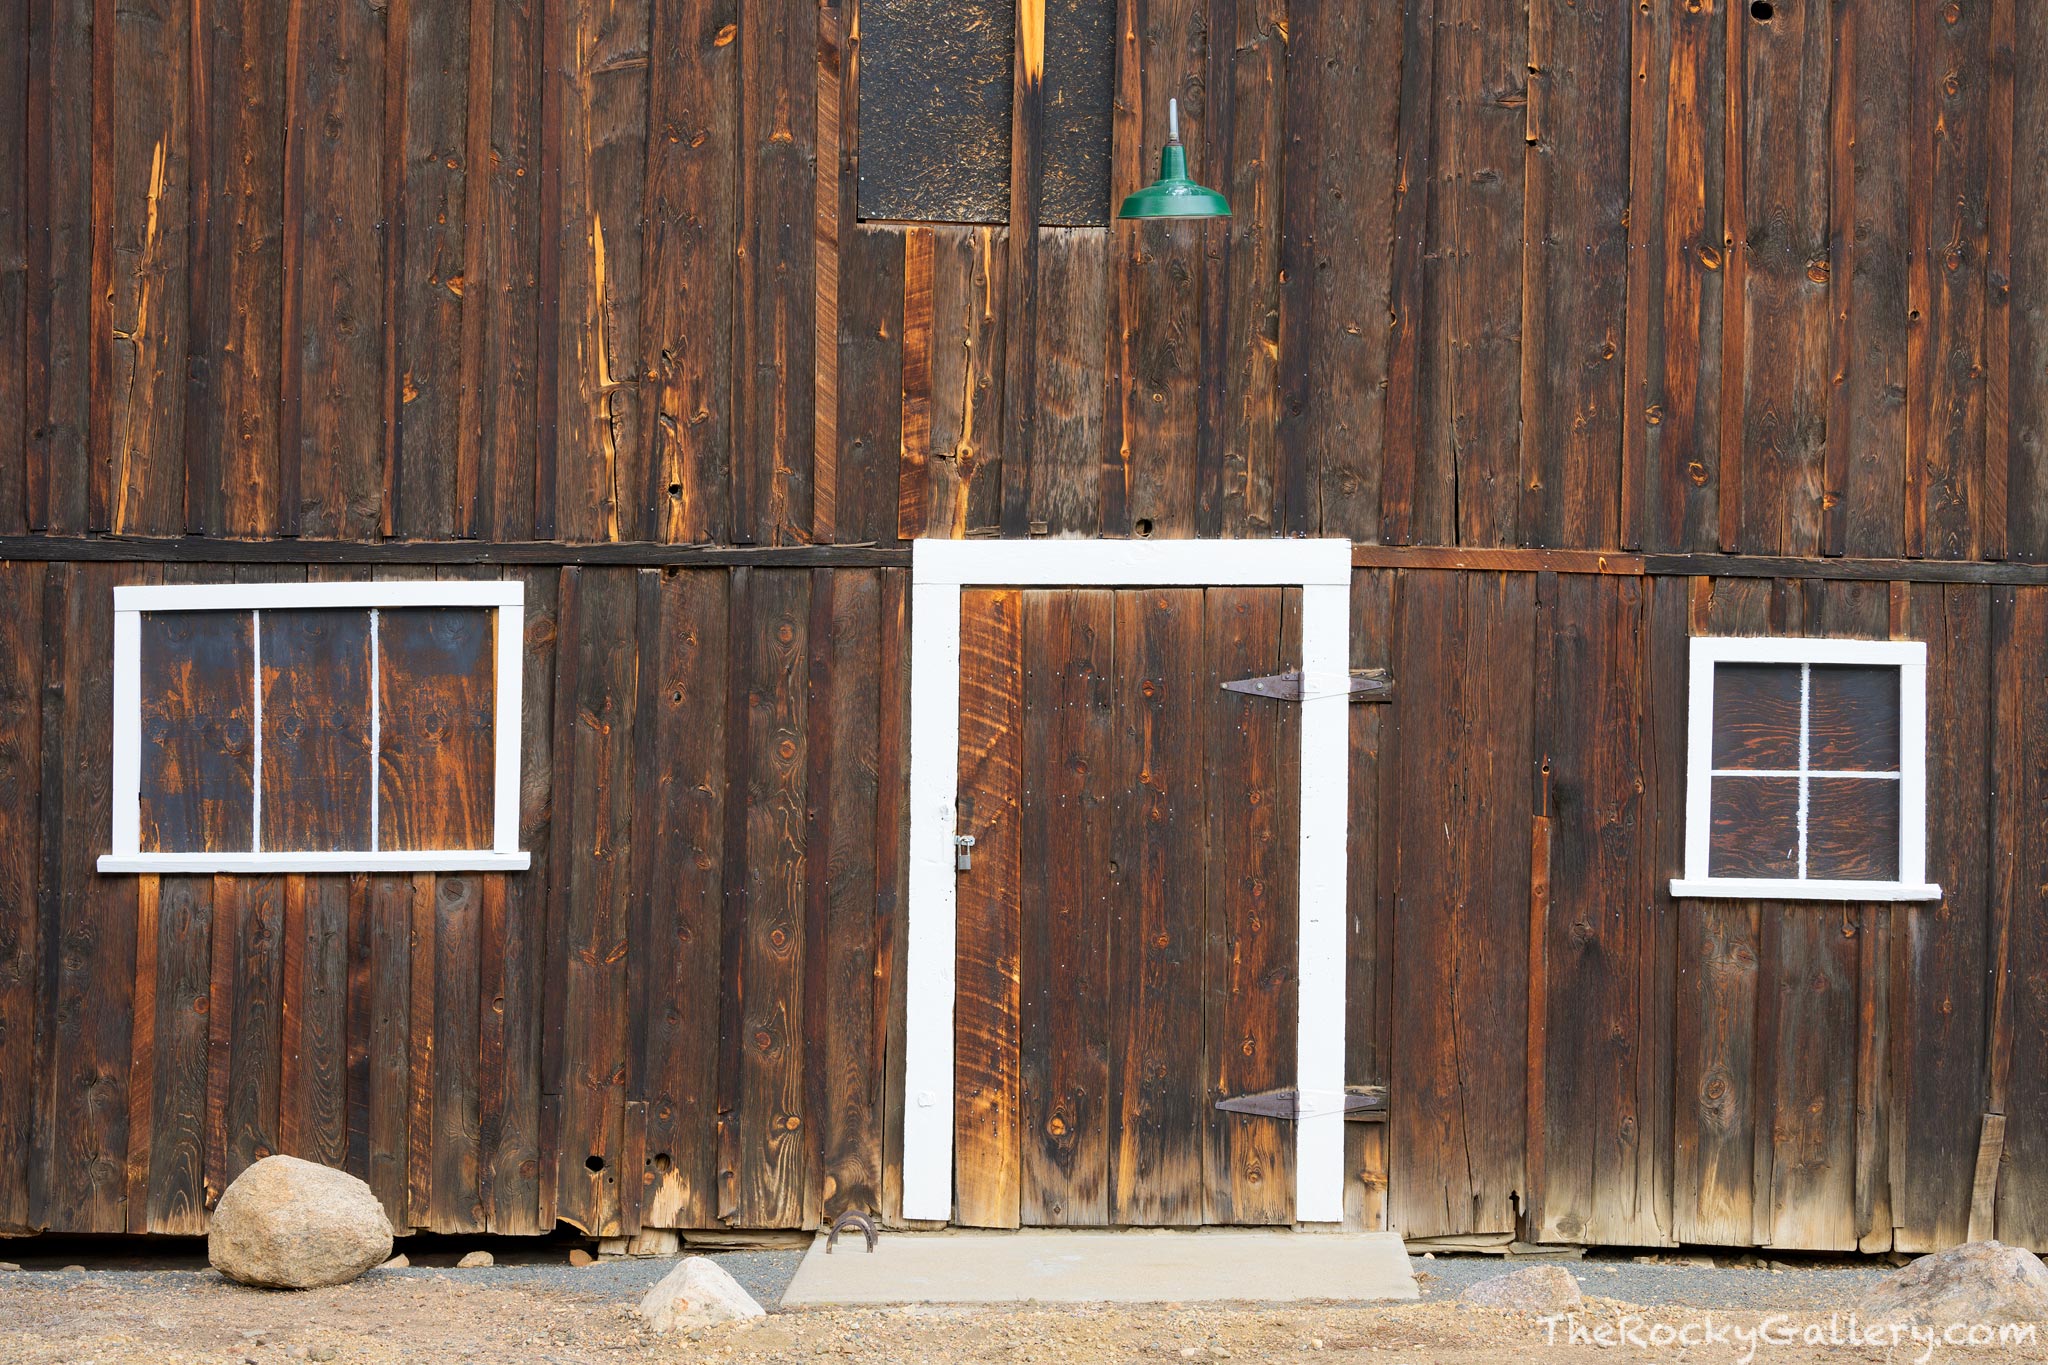 The south door on the McGraw Ranch barn is simple, but elegant. The weather wood, boarded up windows and one metal green light...